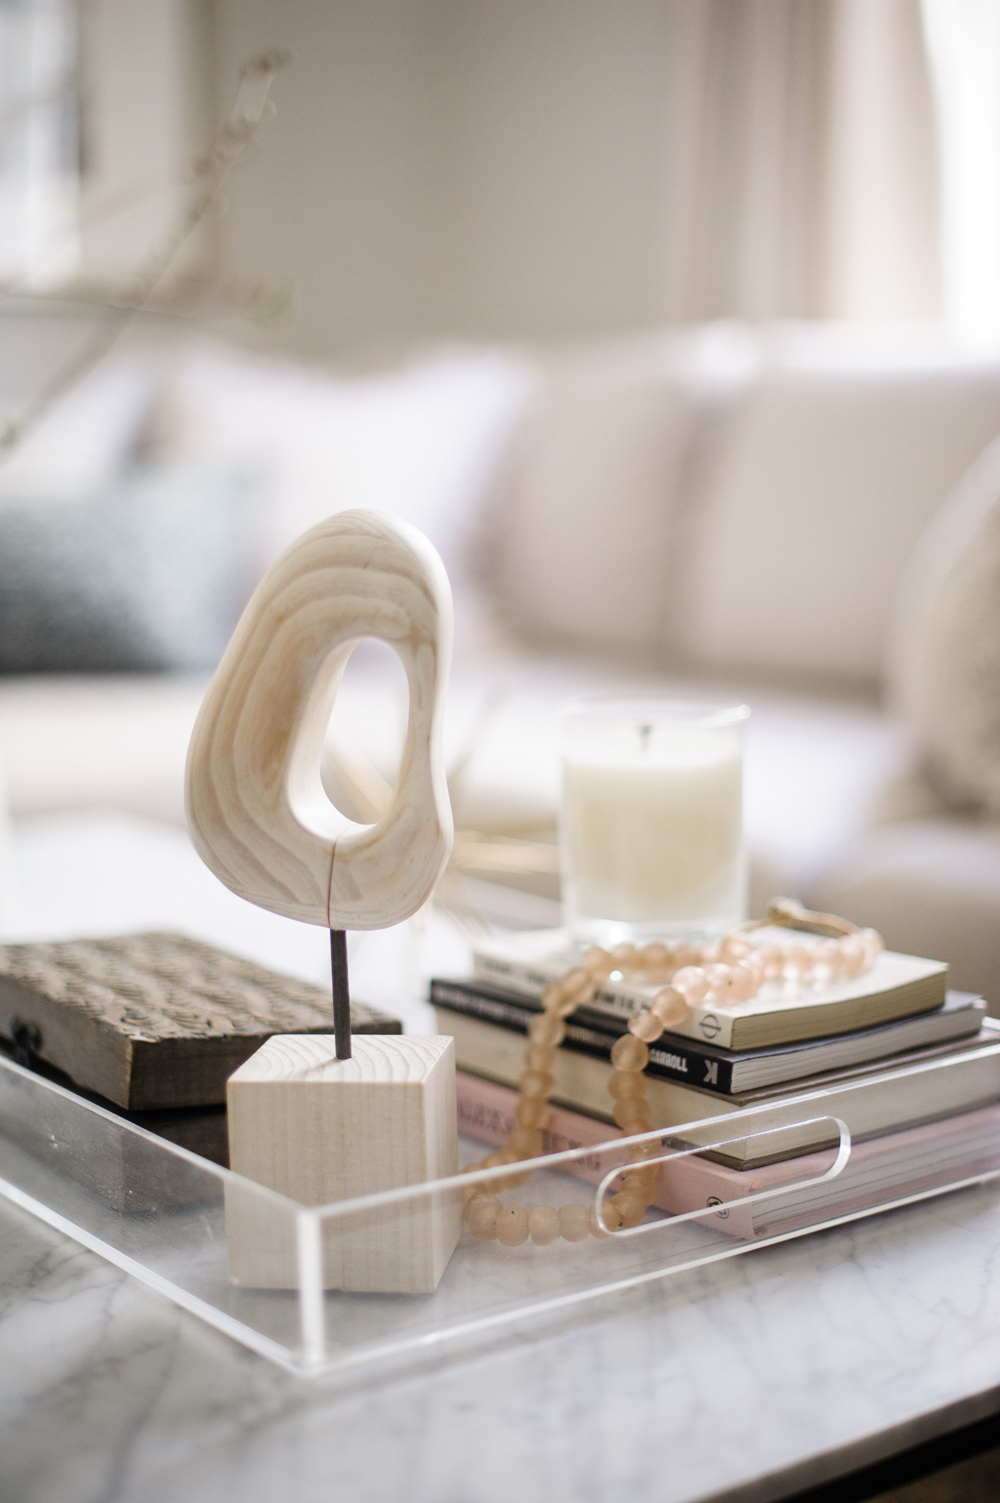 Coffee Table Styling 101